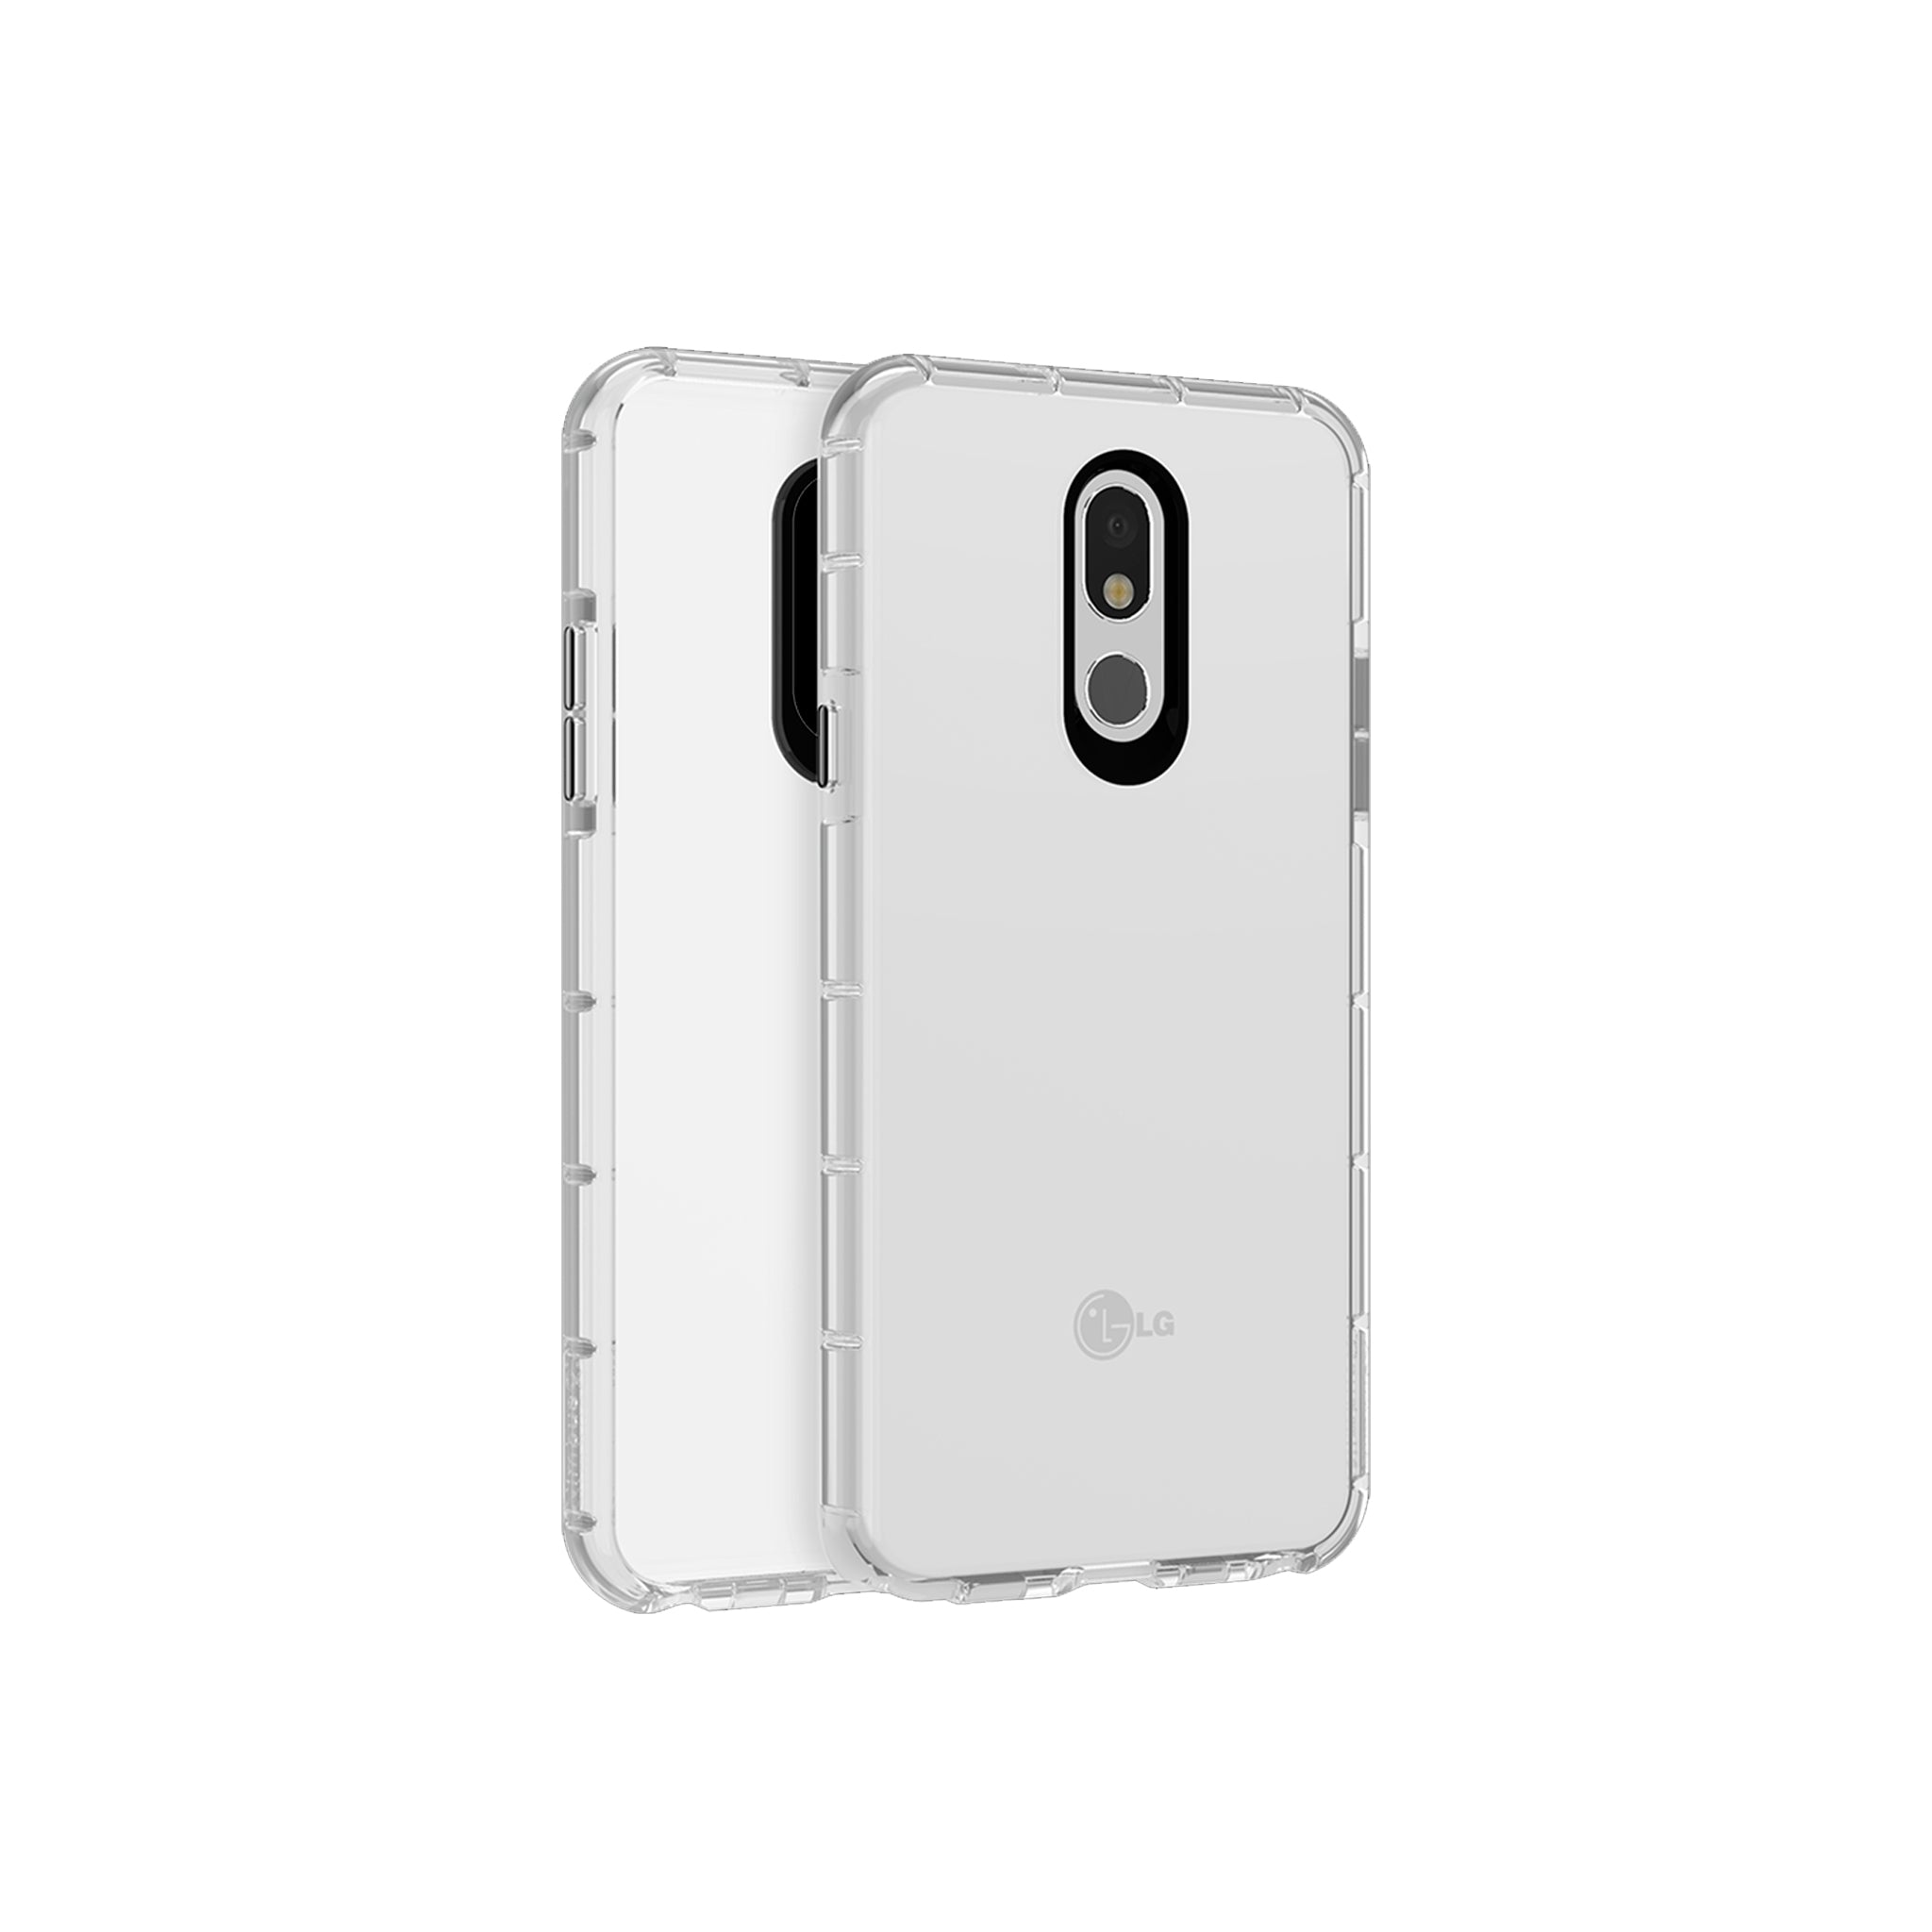 Nimbus9 - Vantage Case For Lg Stylo 5 - Just Clear